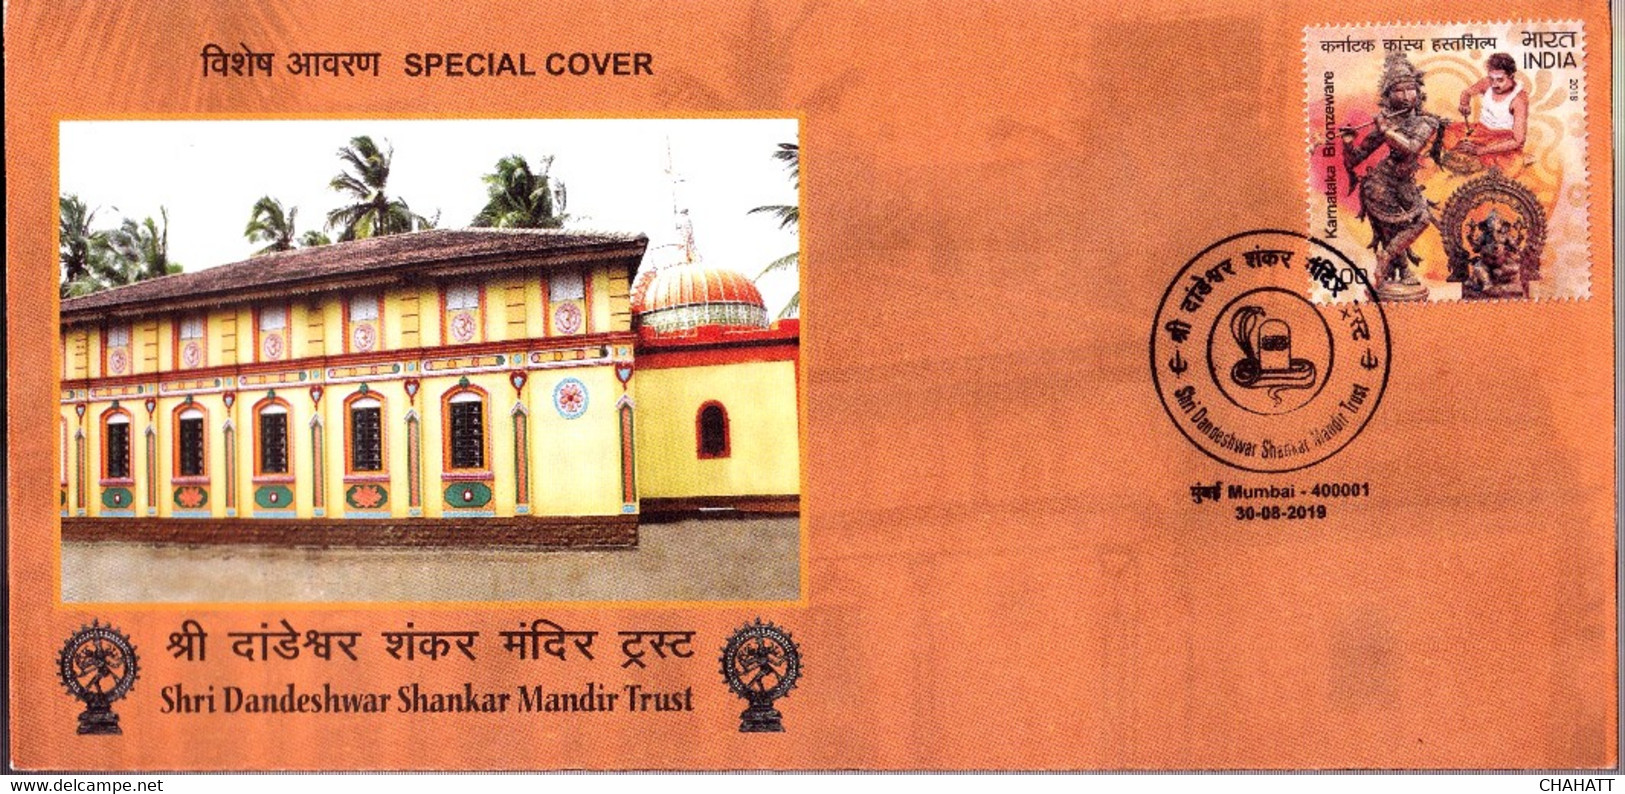 HINDUISM- LORD SHIVA- DANDESHWAR SHANKAR TEMPLE - SPECIAL COVER WITH PICTORIAL CANCELLATION- INDIA-2019-BX3-30 - Induismo